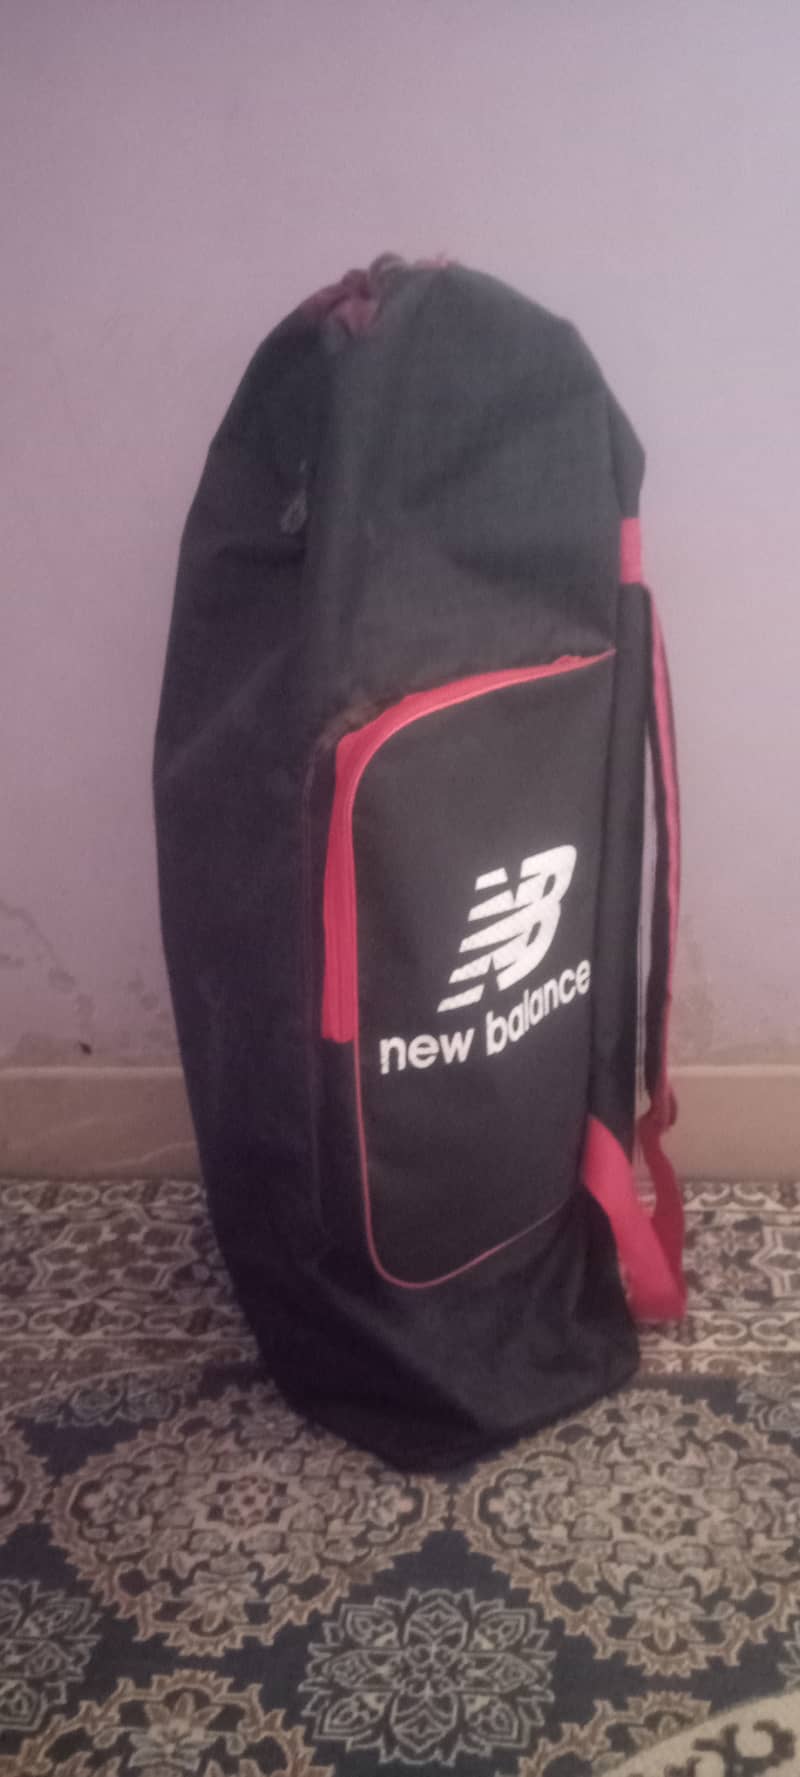 Cricket pad & gloves with bag 2